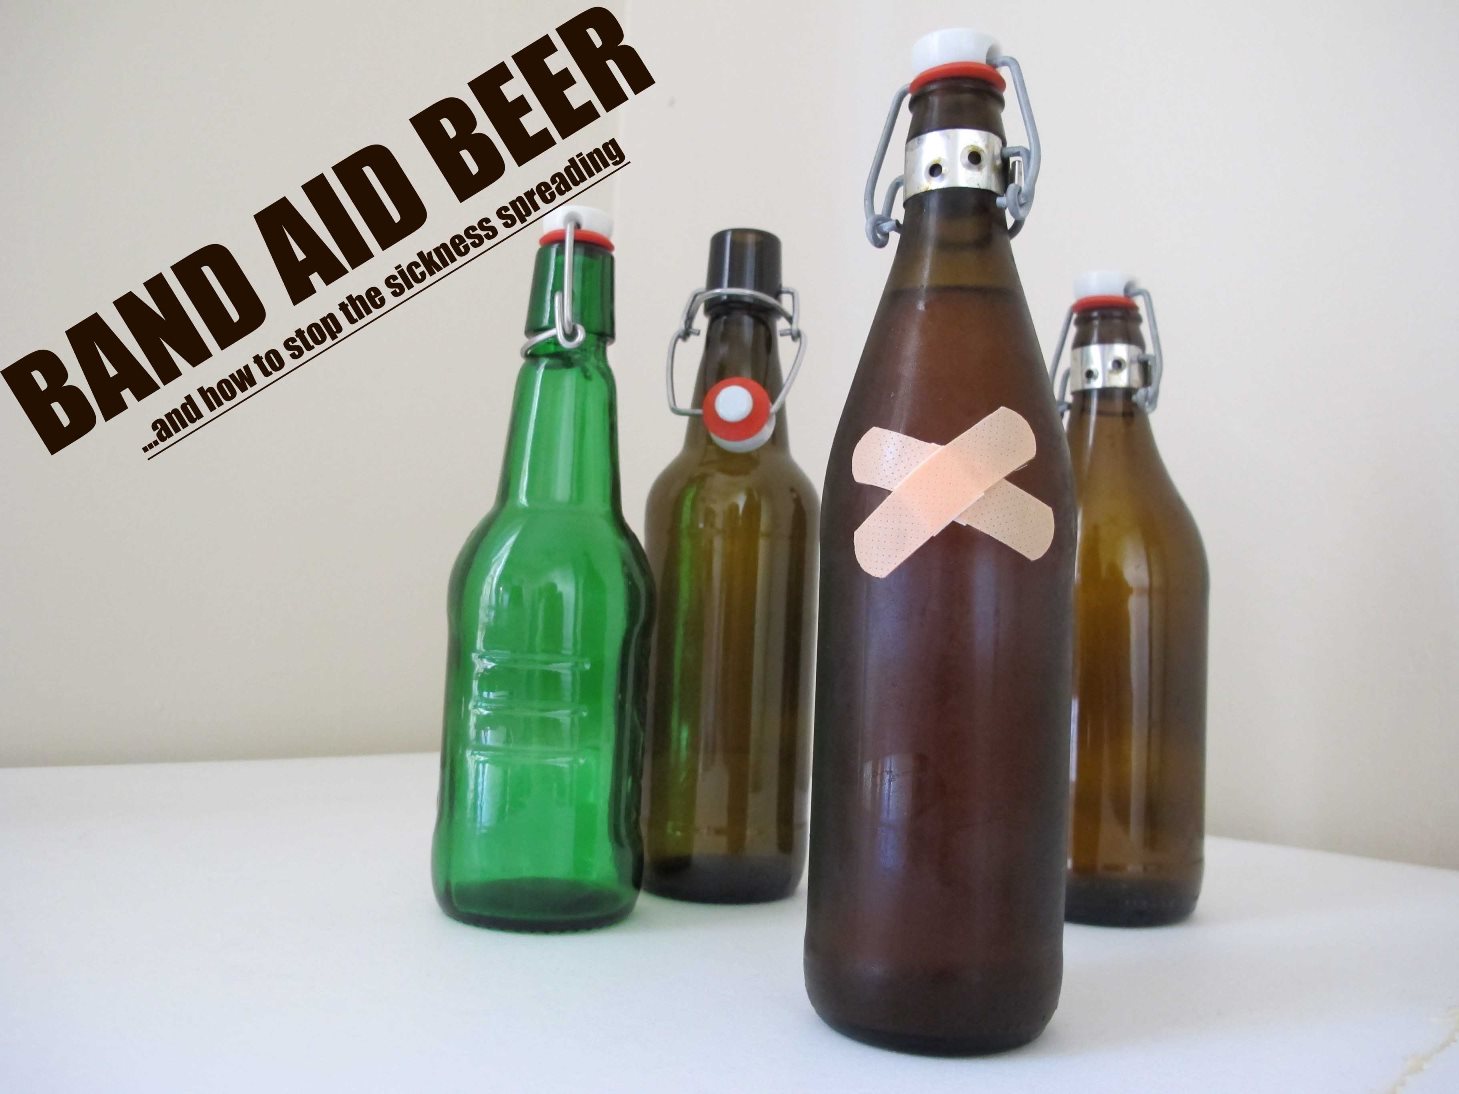 Band Aid Beer…and how to stop the sickness spreading